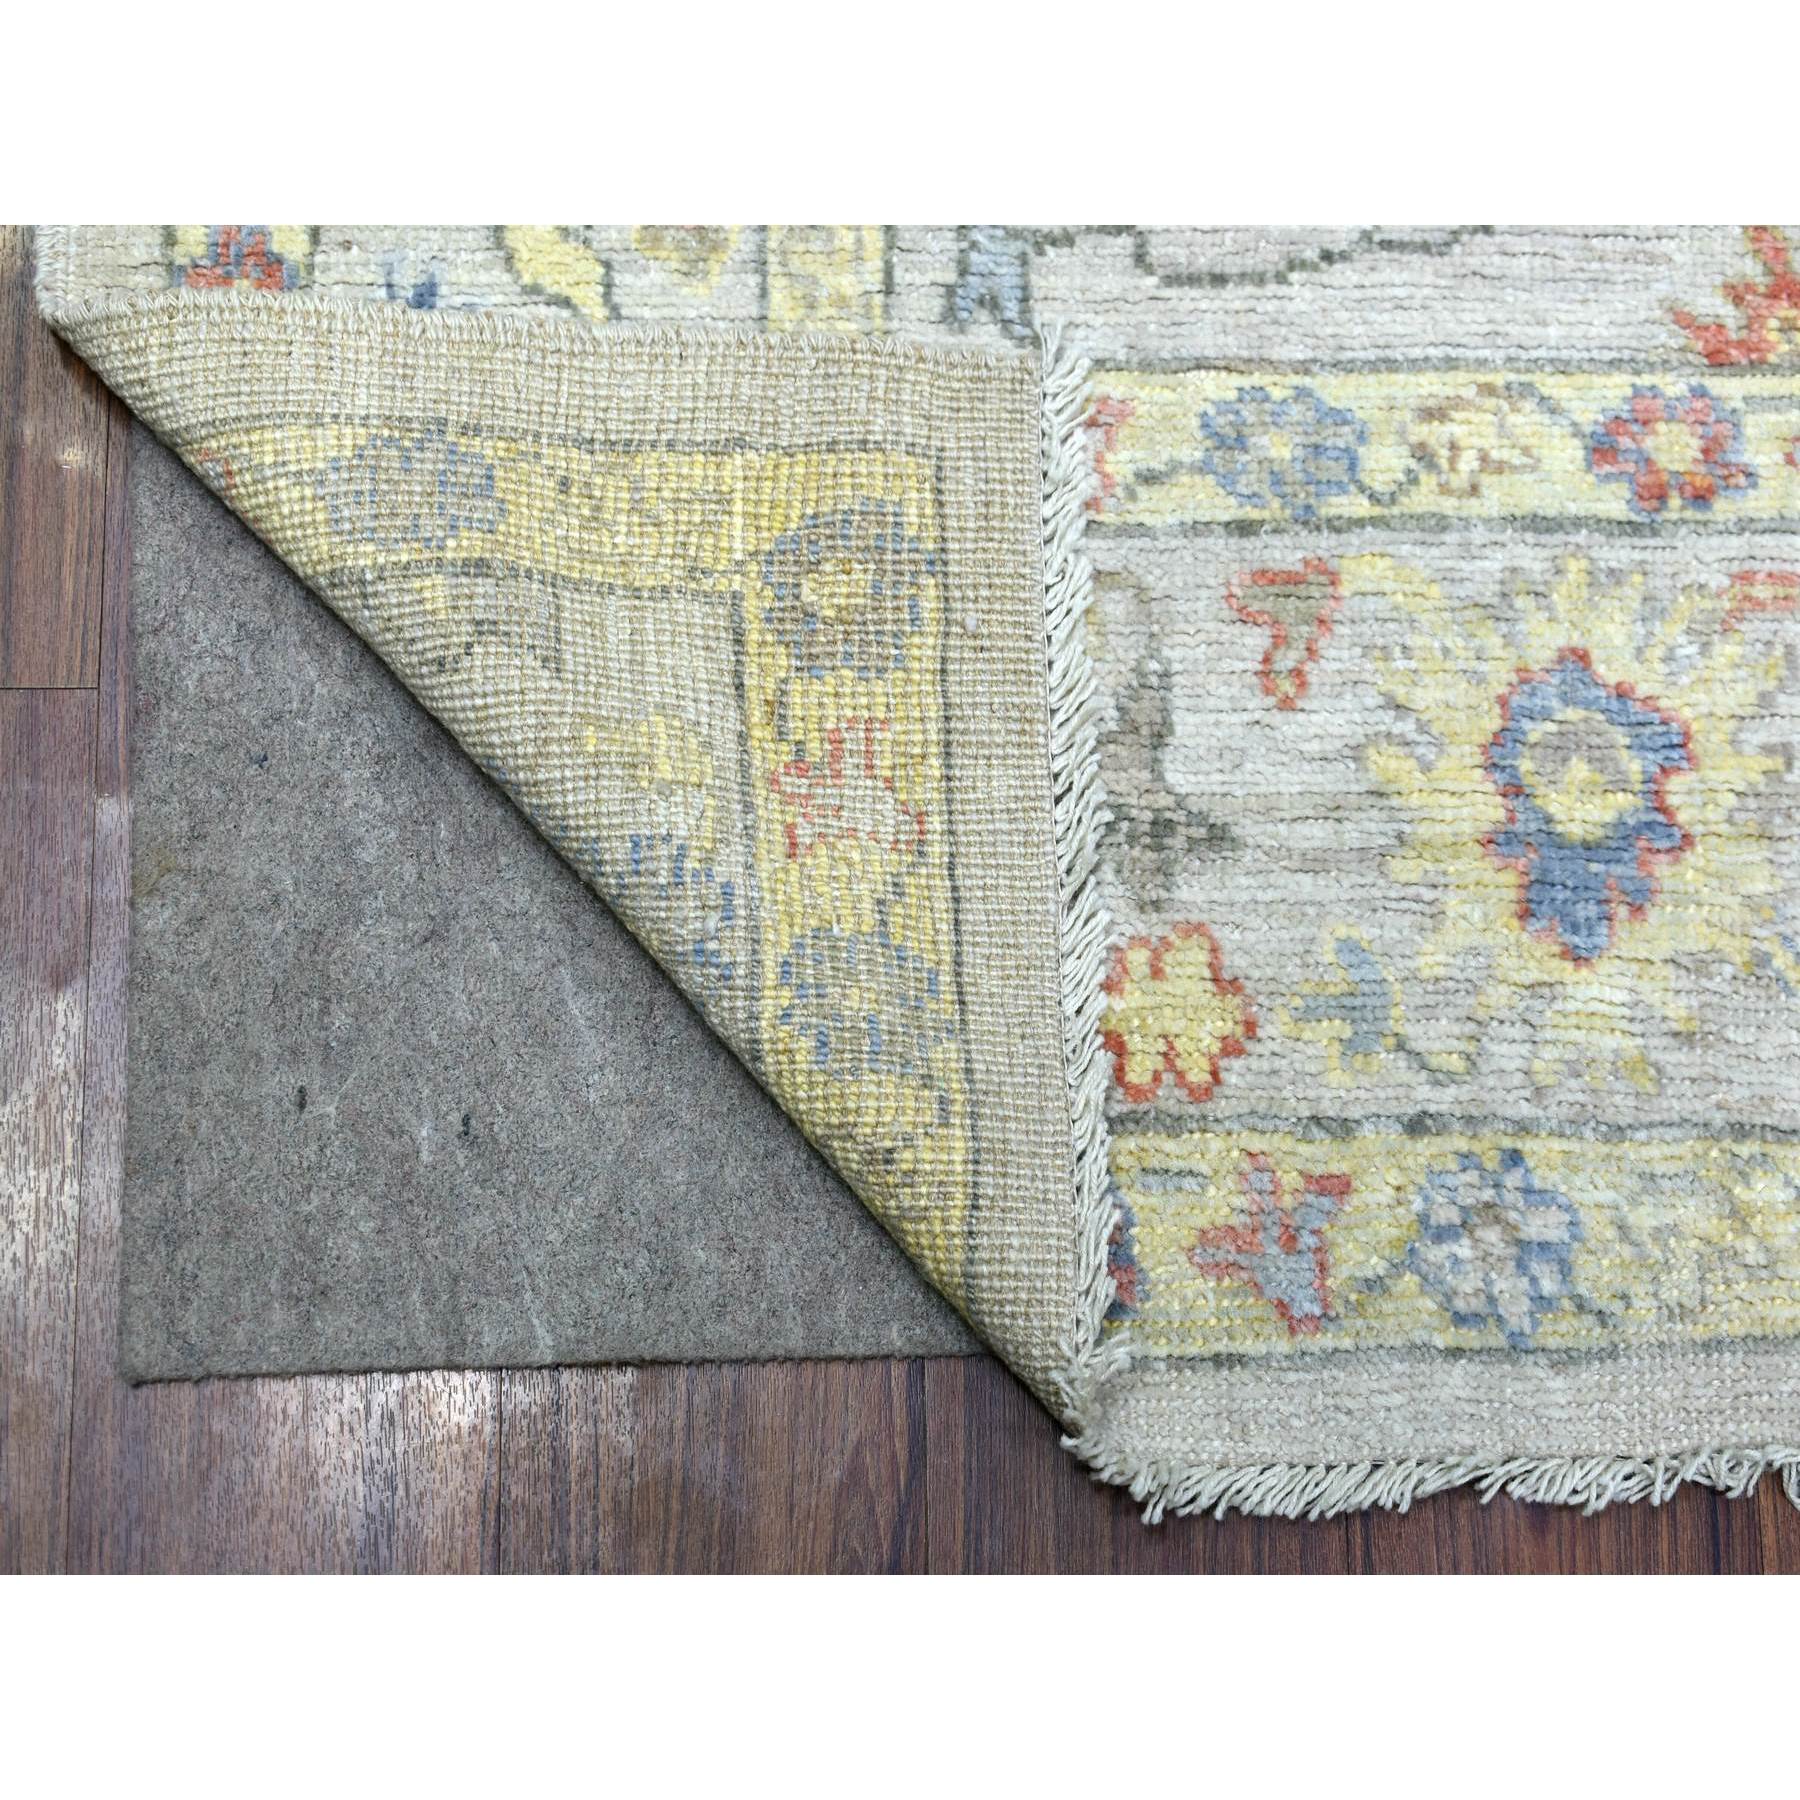 6'x9' Hand Woven Beige Afghan Angora Oushak with Beautiful, Color Pattern Extra Soft Wool Oriental Rug 